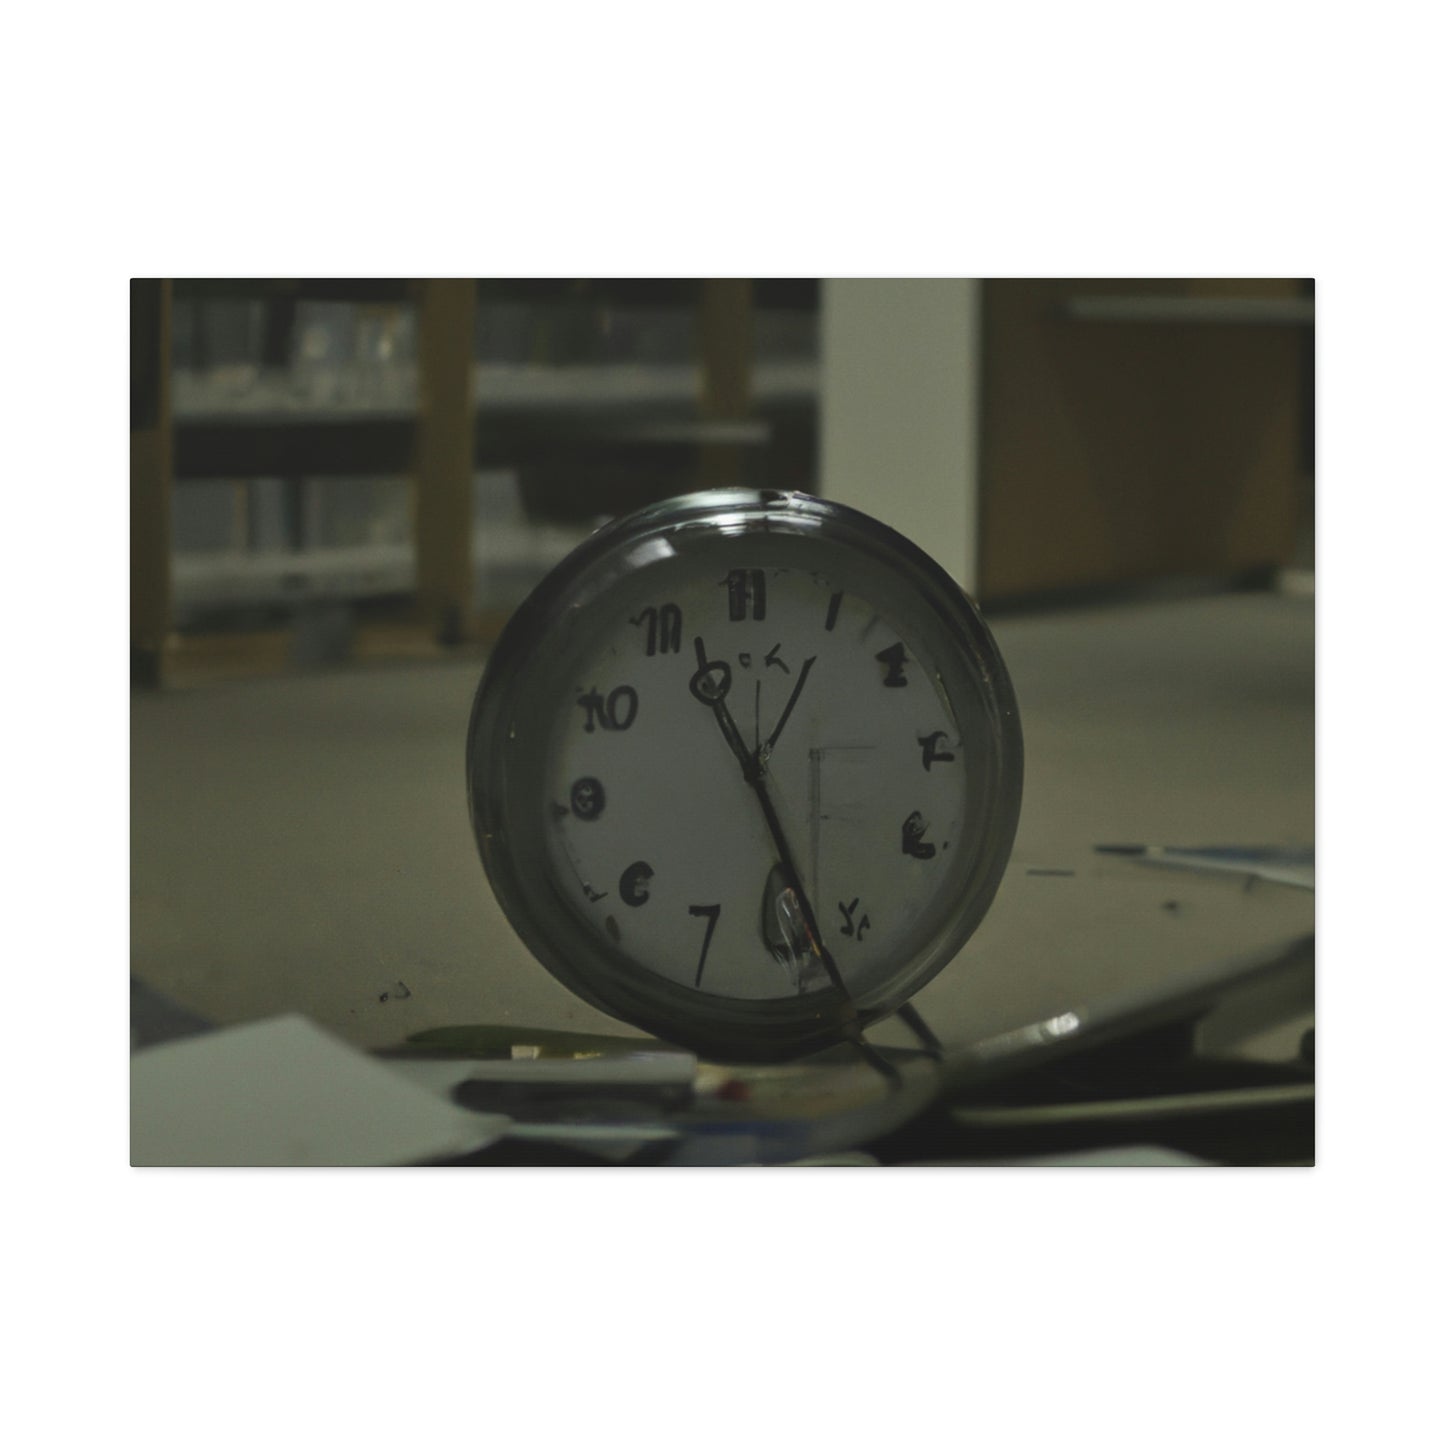 "The Mystery of the Library Clock" - The Alien Canva